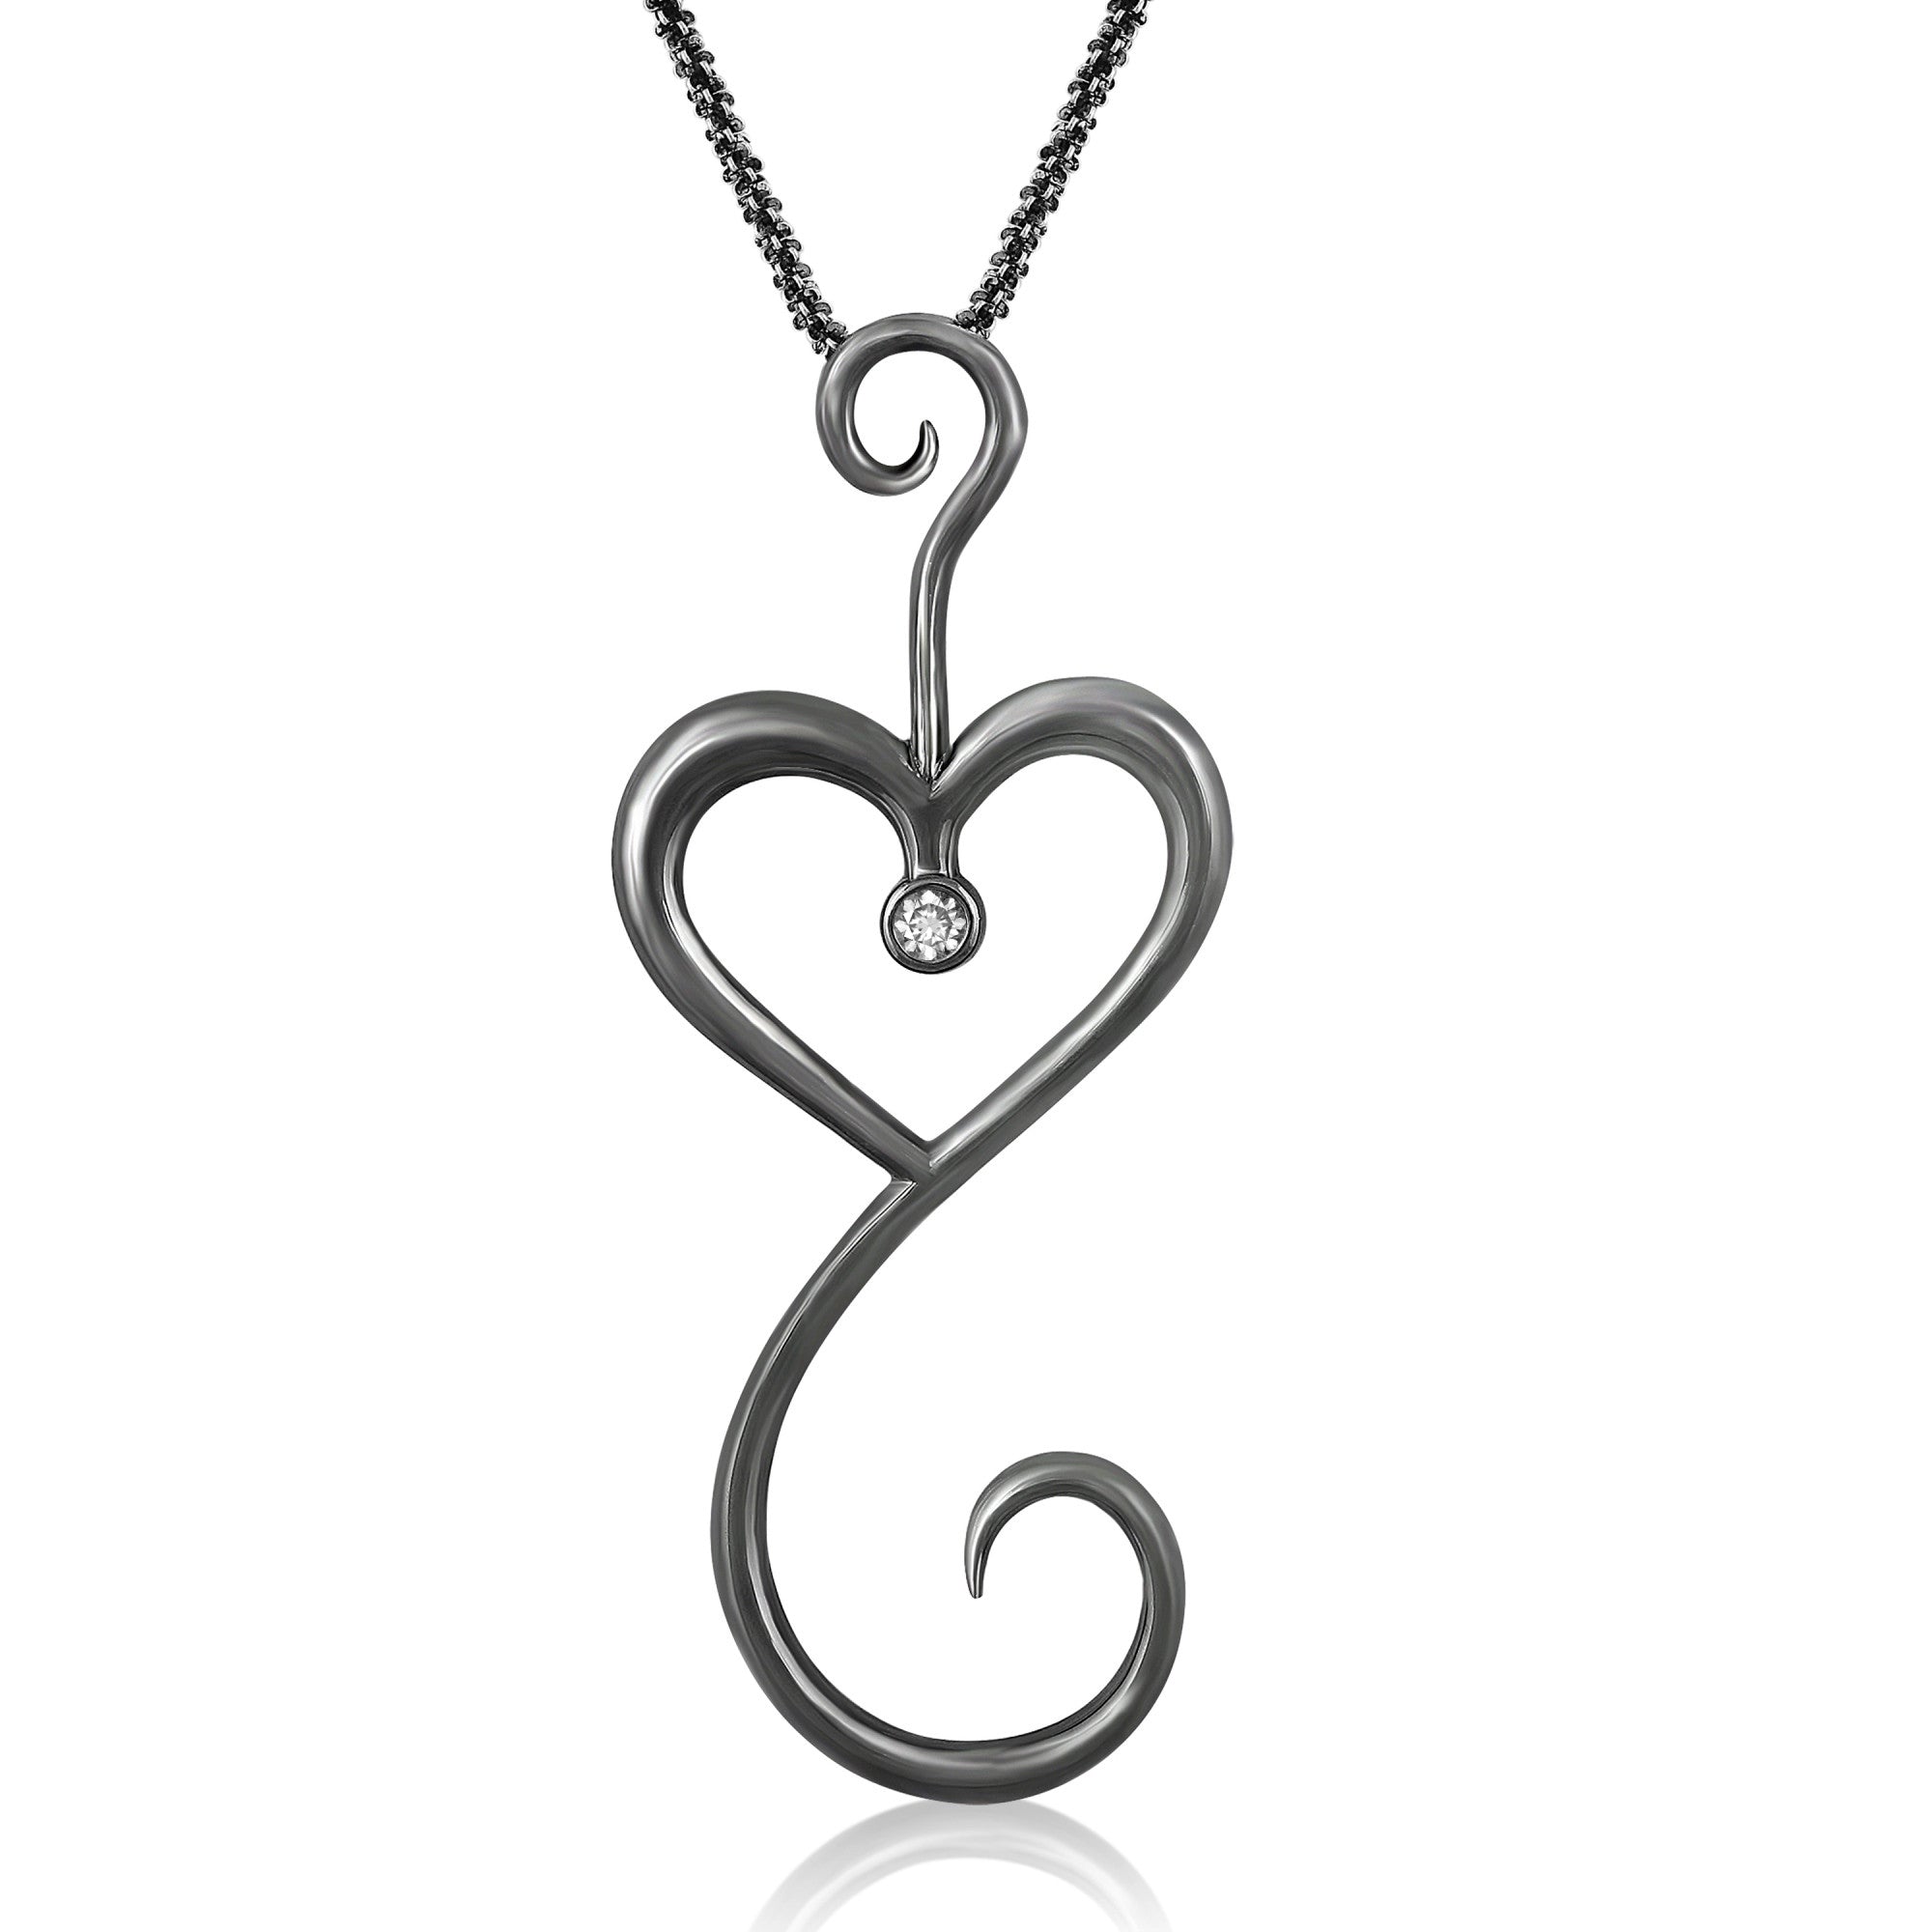 Intrikit Heart - Solid Sterling Silver .925 with a Black Rhodium finish and a 3mm White Sapphire Center Stone